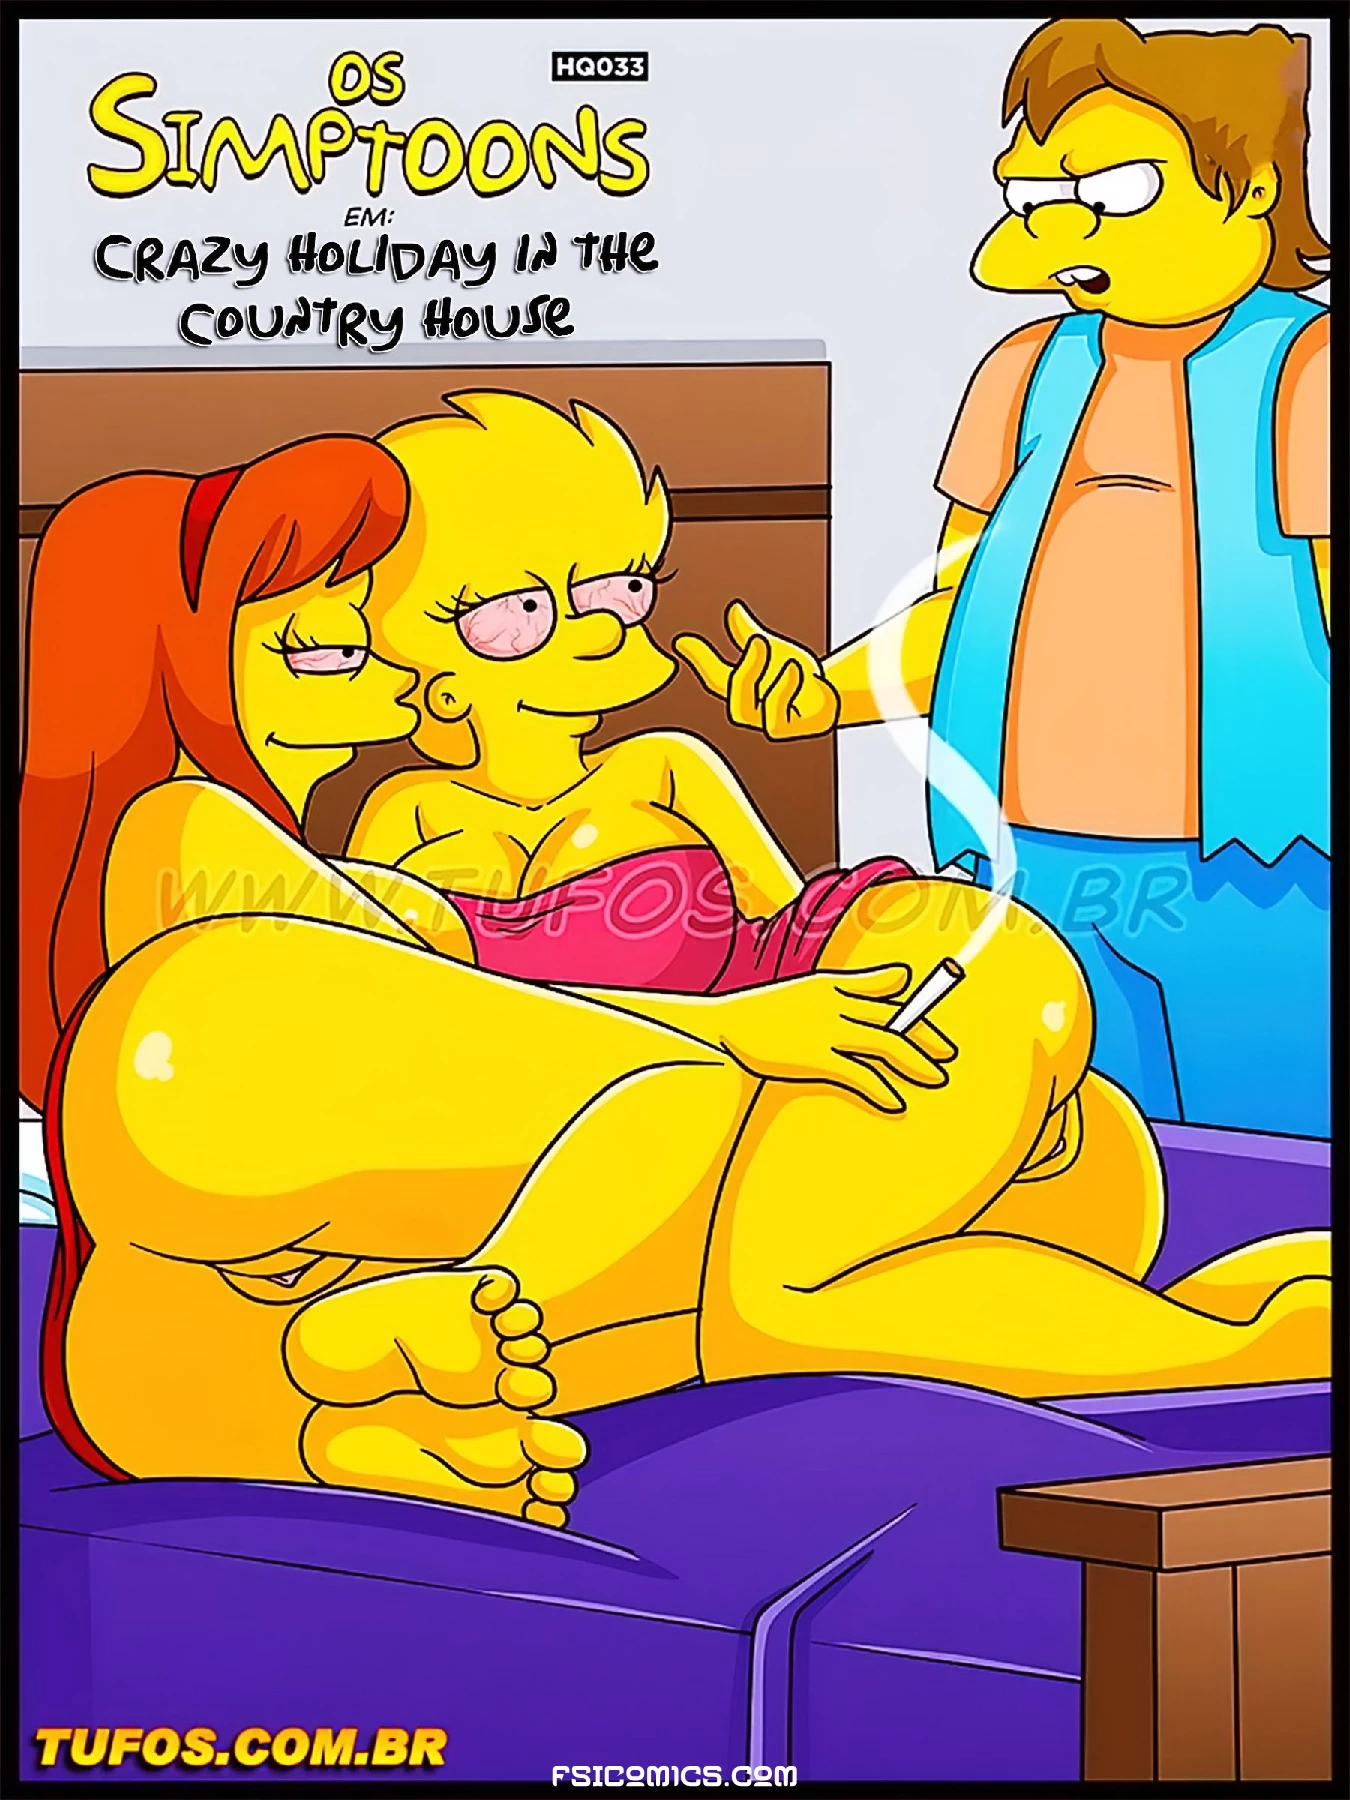 The Simpsons Chapter 33 – Crazy Holiday in the Country House – WC TF - 43 - FSIComics